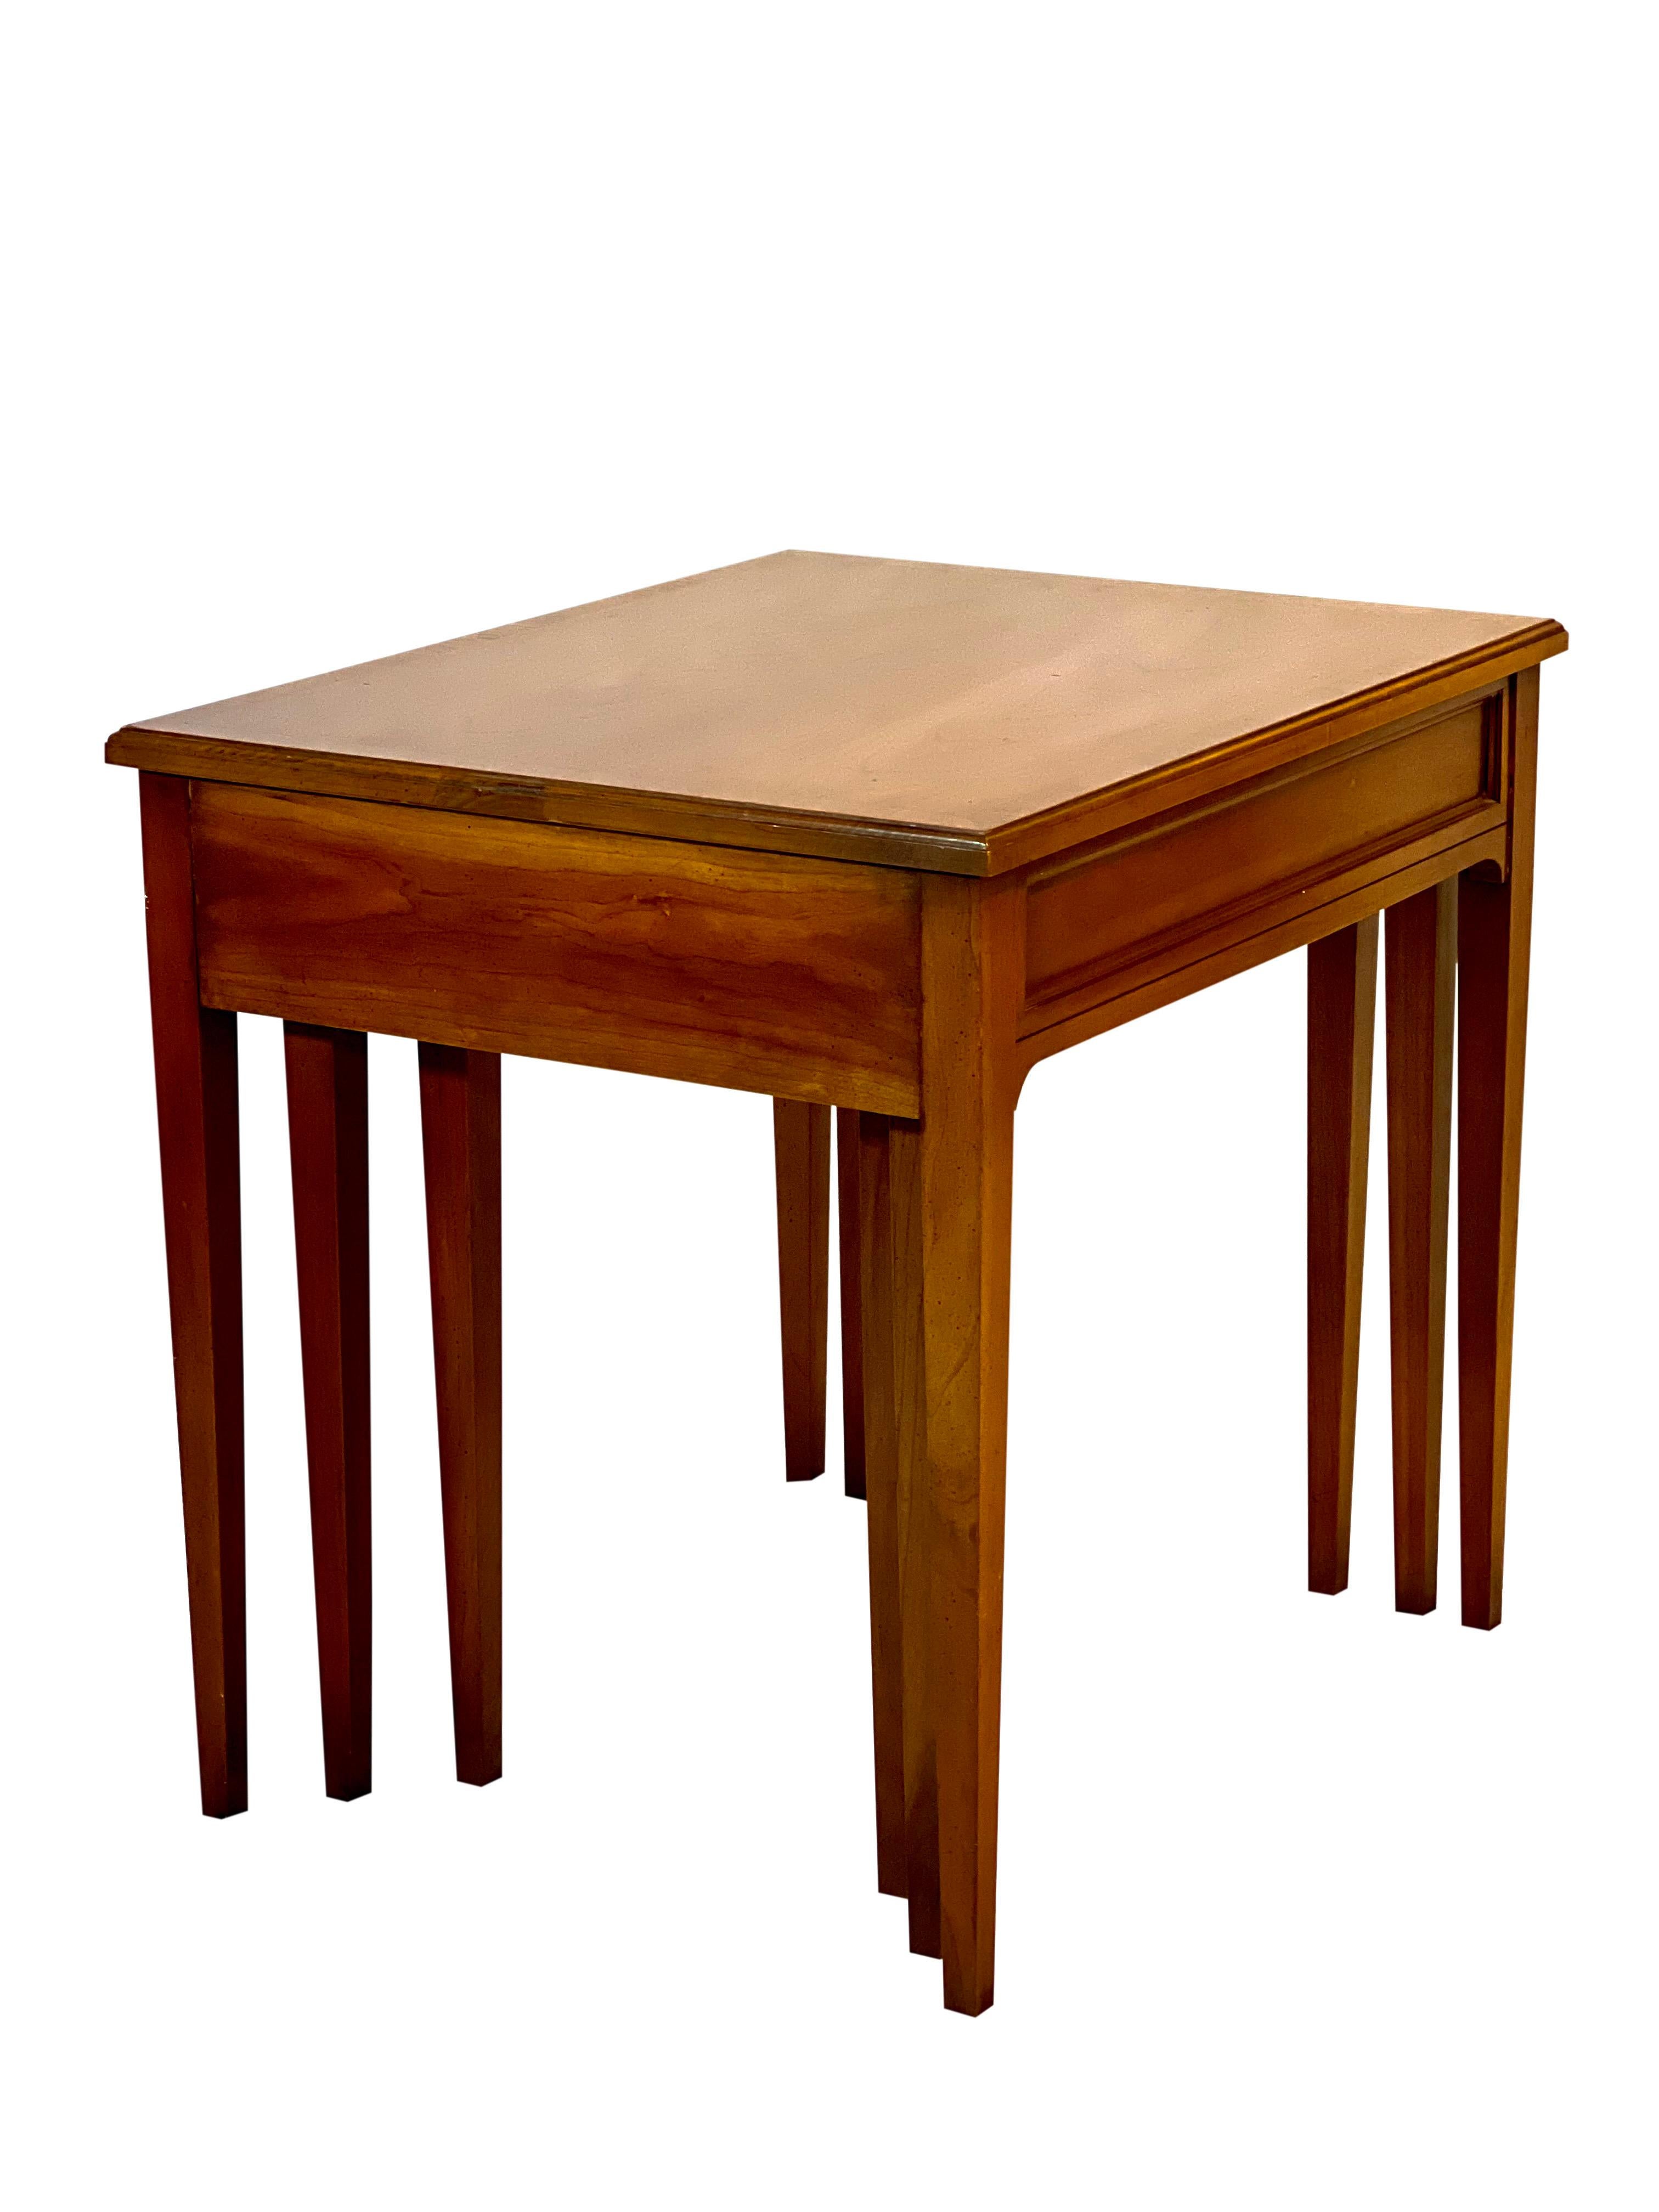 North American Midcentury Fruitwood Nesting Tables by Heritage, Set of 3 For Sale